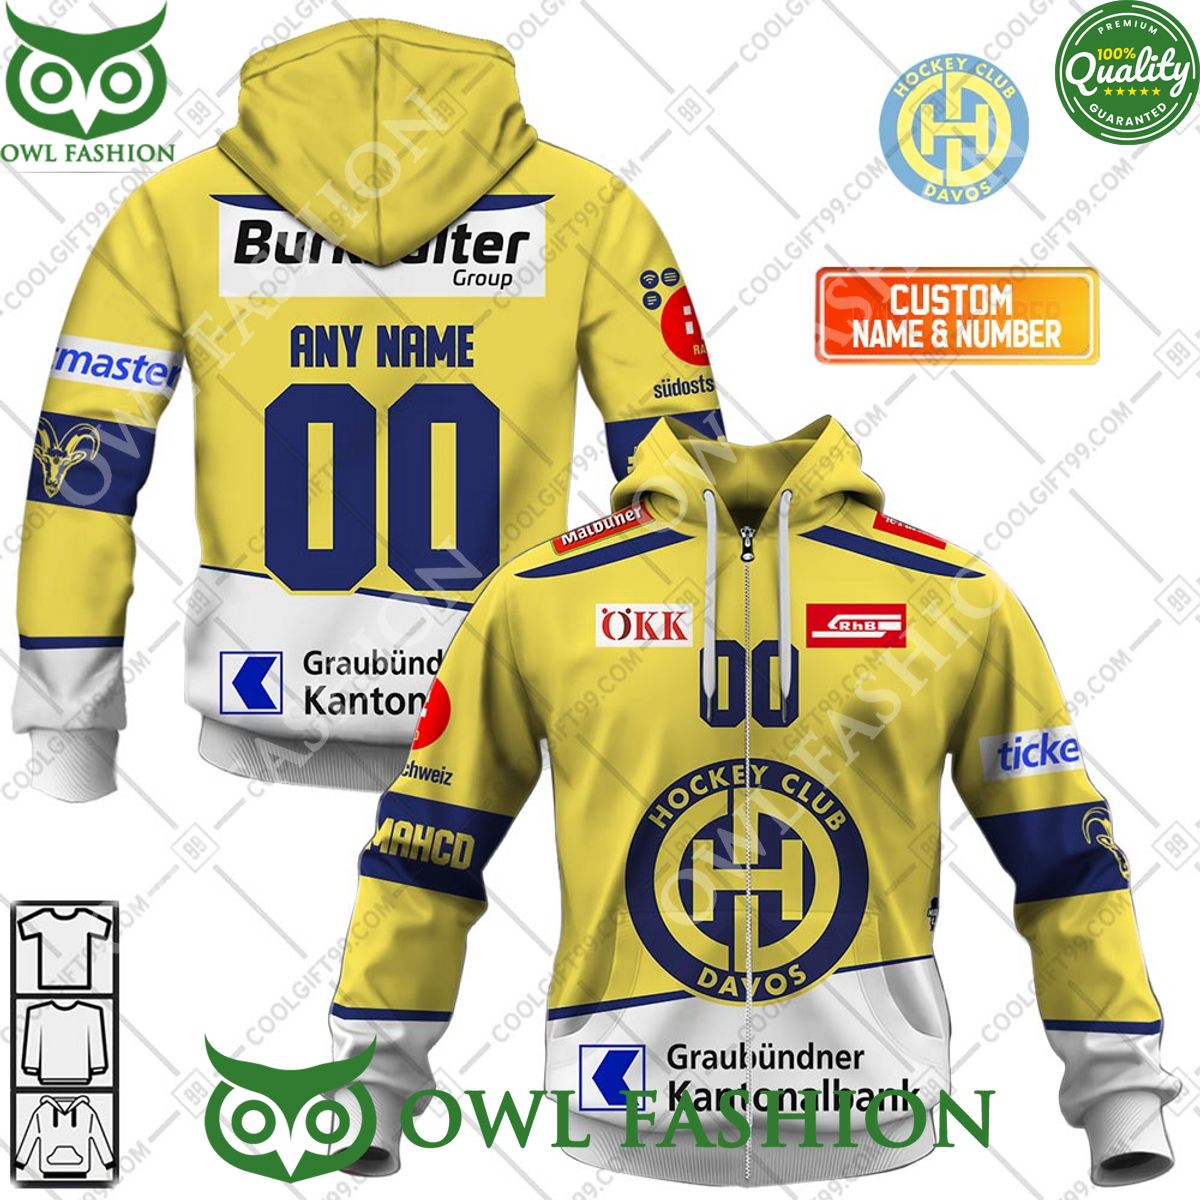 personalized name and number nl hockey hc davos away jersey style printed hoodie shirt 1 mEYGu.jpg